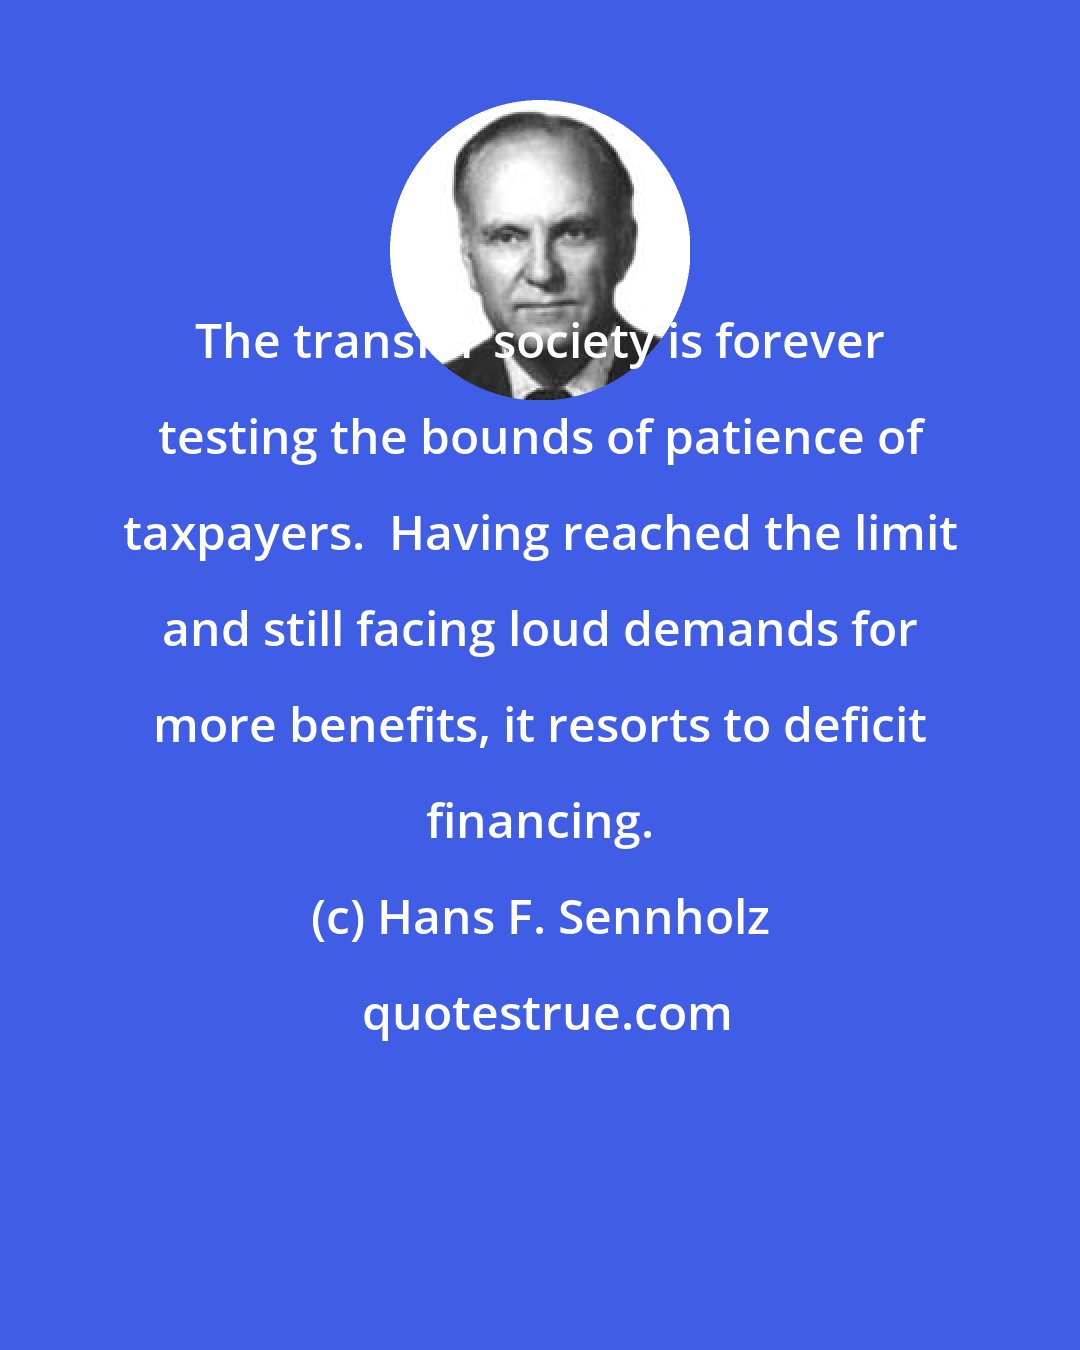 Hans F. Sennholz: The transfer society is forever testing the bounds of patience of taxpayers.  Having reached the limit and still facing loud demands for more benefits, it resorts to deficit financing.